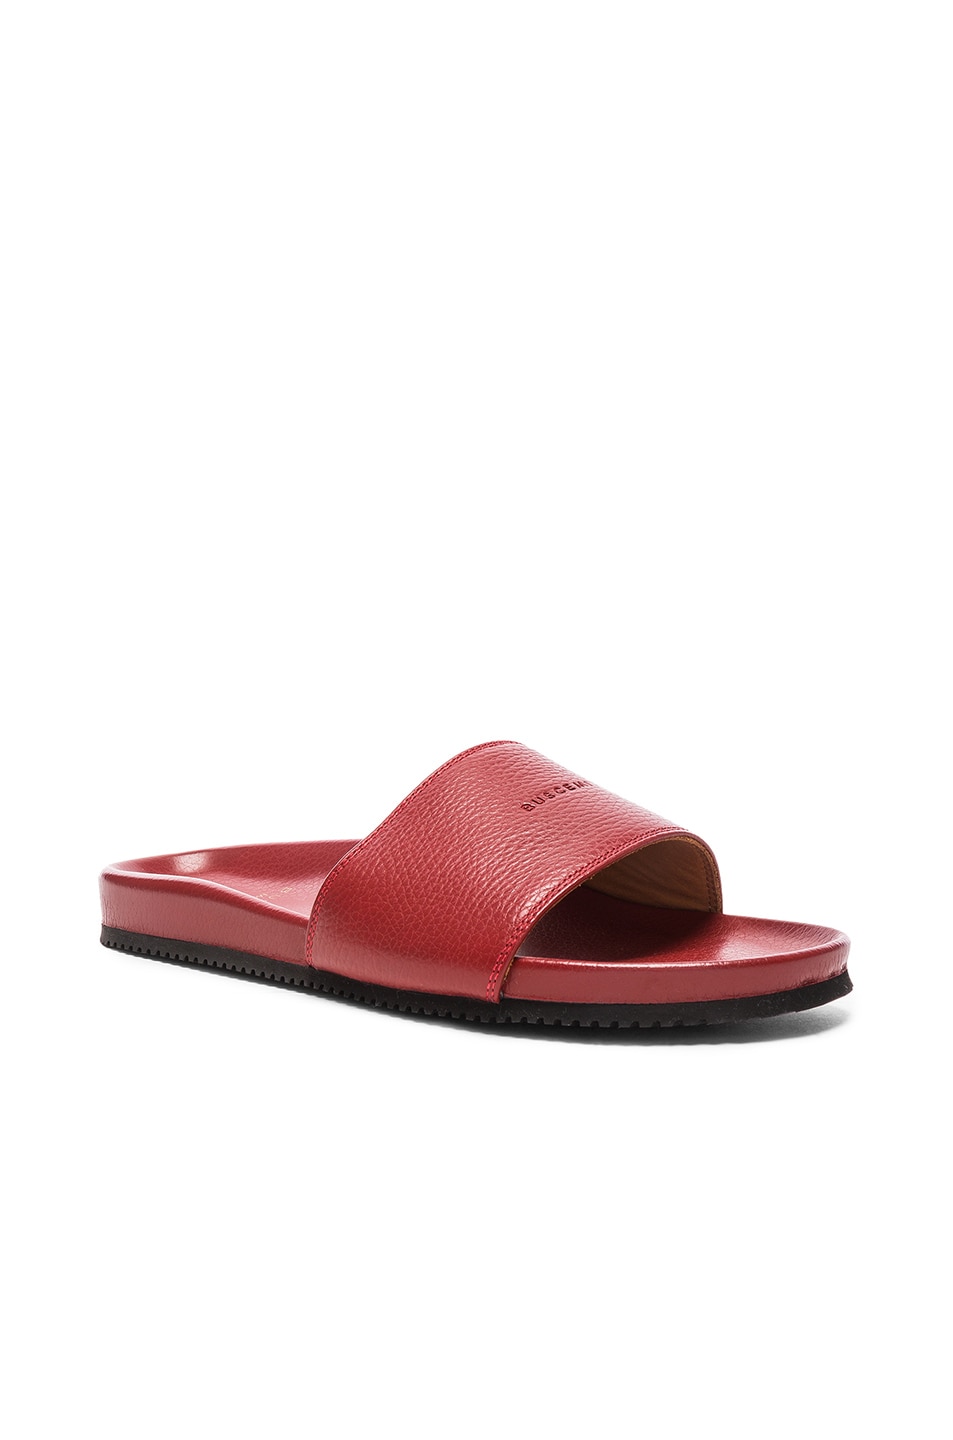 Image 1 of Buscemi Classic Leather Slide Sandals in Red